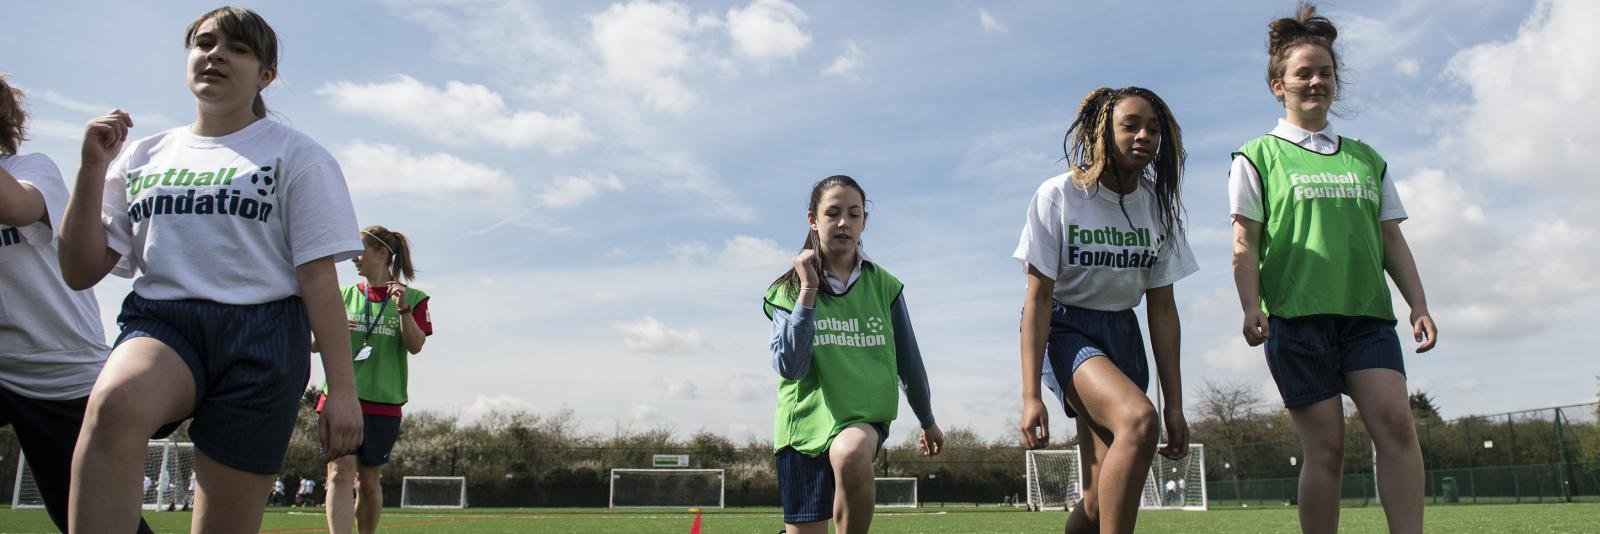 Football Foundation Monthly: Find your nearest place to play football with PitchFinder